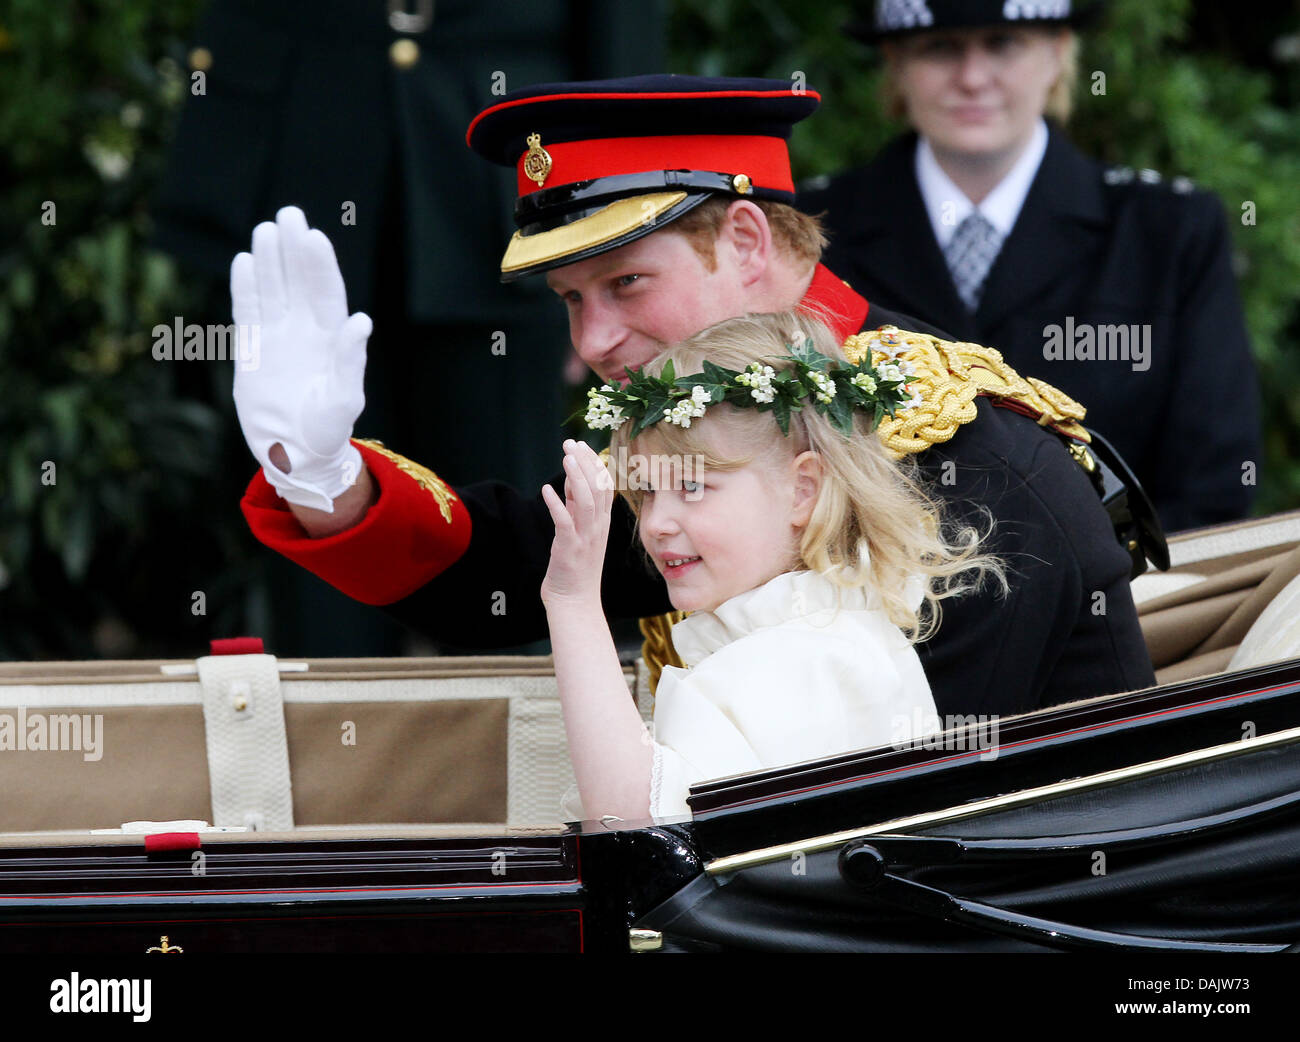 Prince Harry and Lady Louise Windsor ride in a horse-drawn carriage from Westminster Abbey to Buckingham Palace in London, Britain, 29 April 2011, after the wedding ceremony of Prince William and Kate Middleton. Some 1,900 guests followed the royal marriage ceremony of Prince William and Kate Middleton in the church. Photo: Patrick van Katwijk Stock Photo